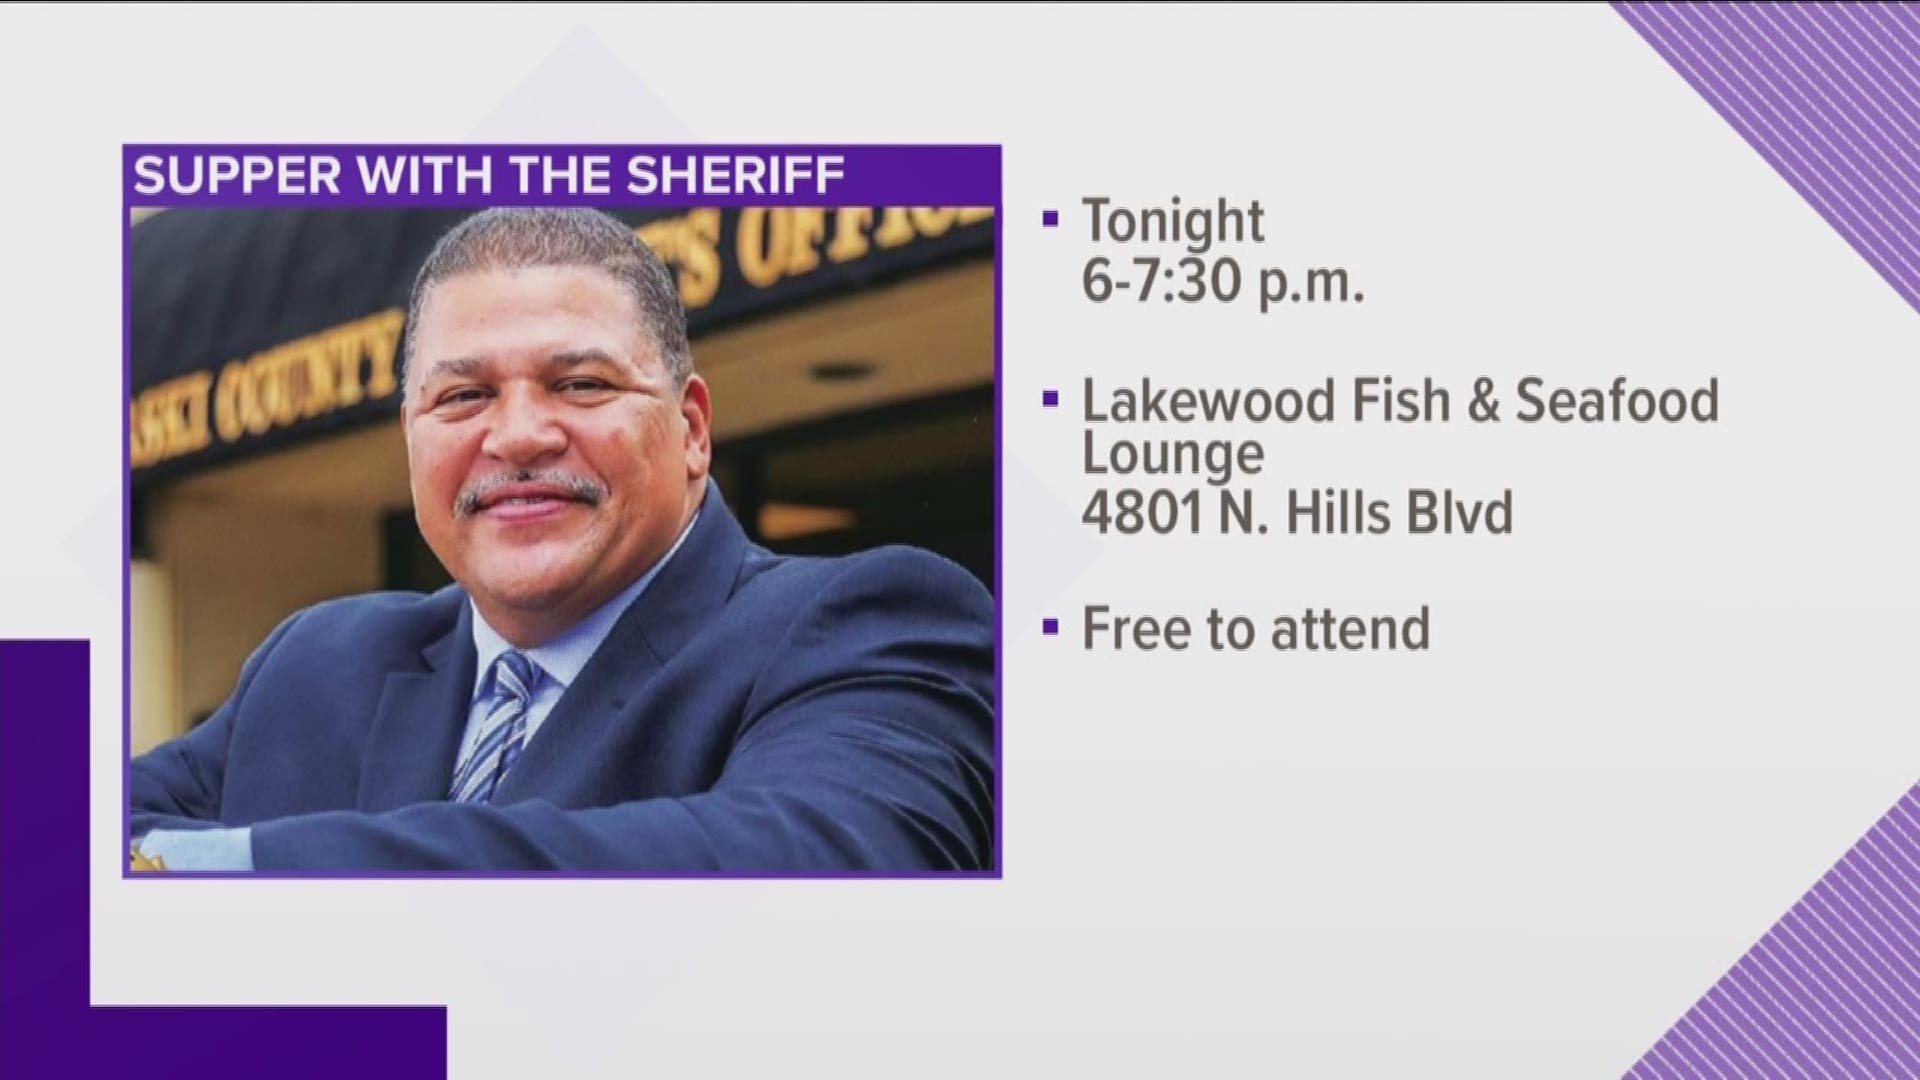 If you have concerns about the safety of Pulaski county, you can take them up with the sheriff personally tonight.